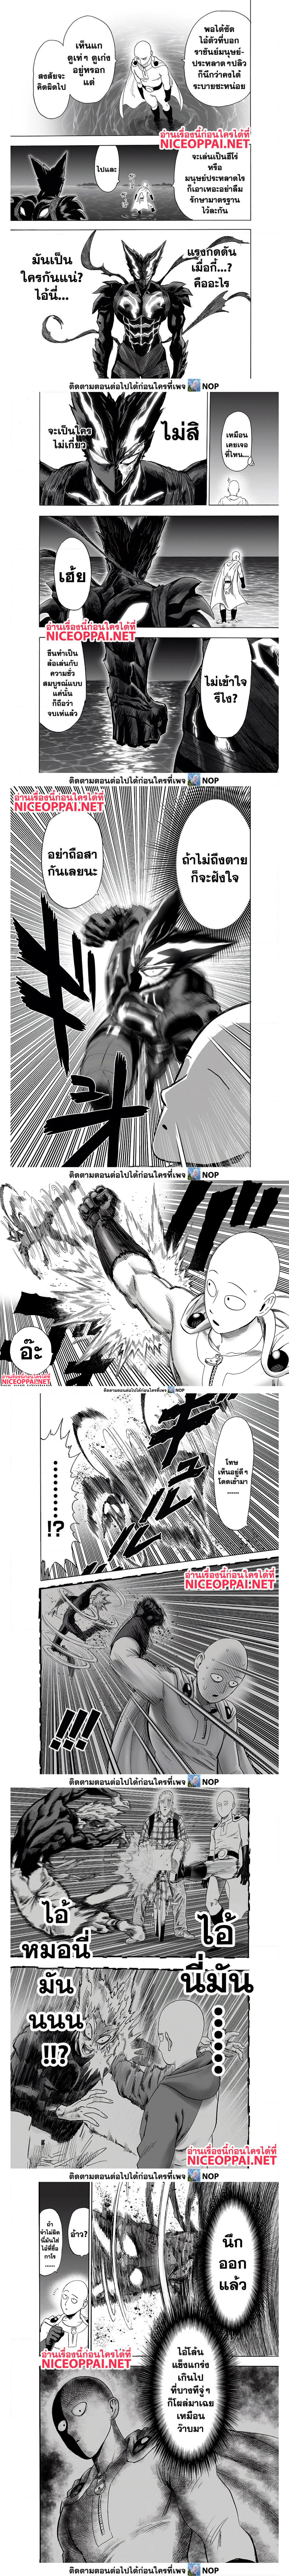 One Punch Man 161 (3)